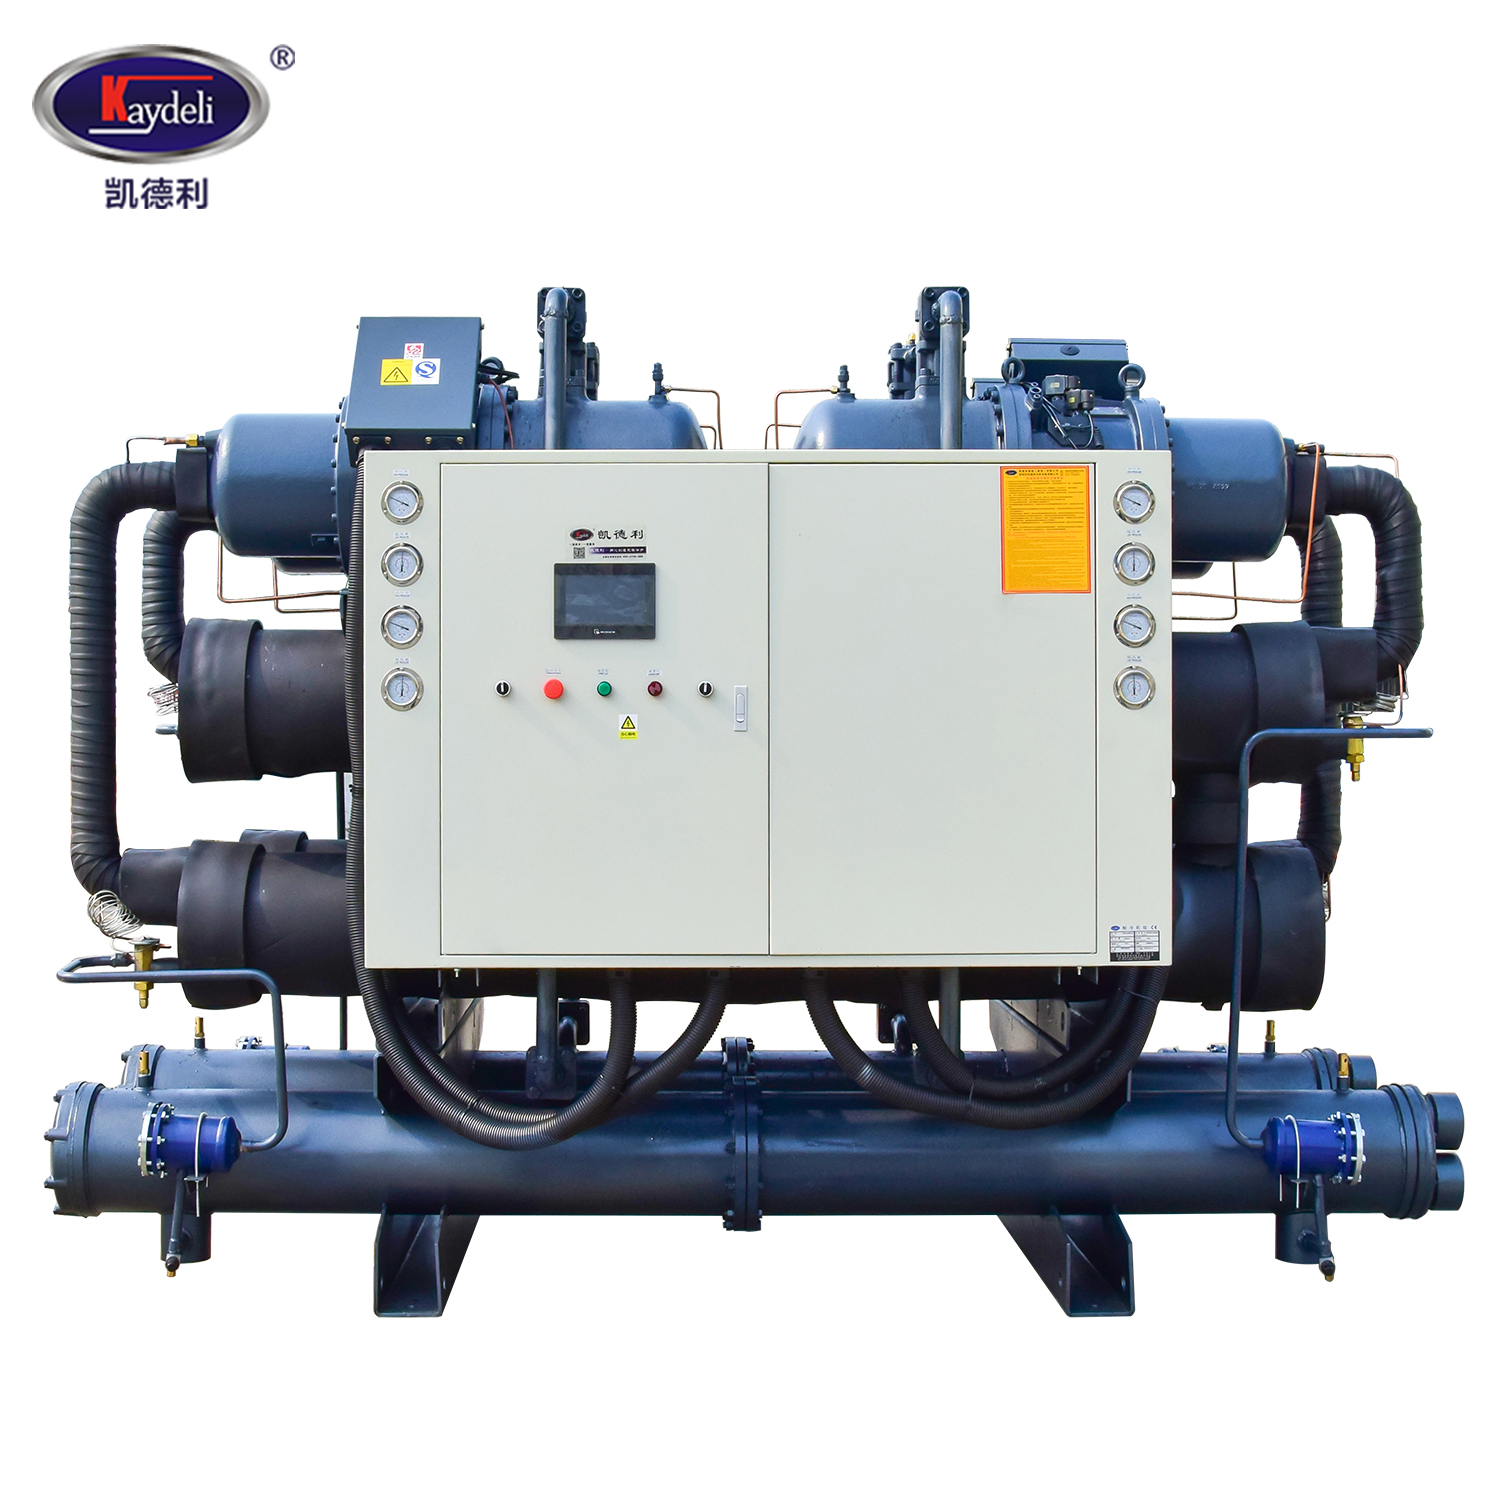 640hp 520ton 520Rt Water Cooled Screw Compressor Chiller For Anodizing  In Building